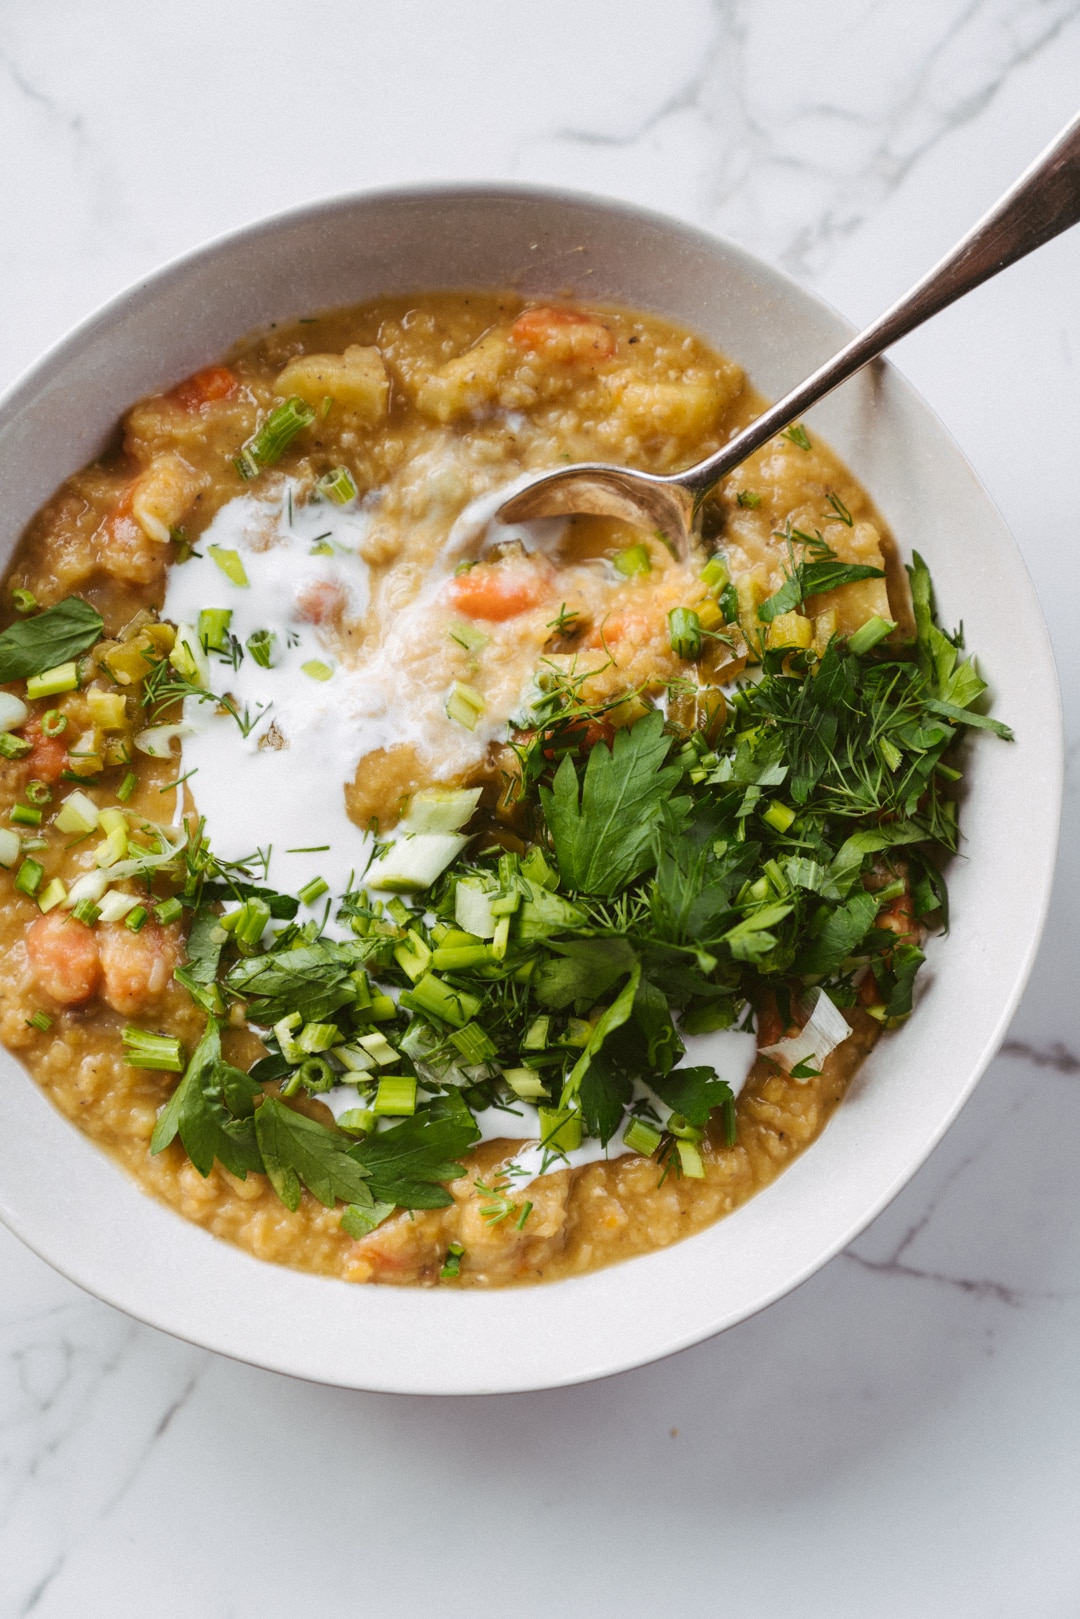 Warming Red Lentil, Potato And Carrot Stew With Fresh Herbs